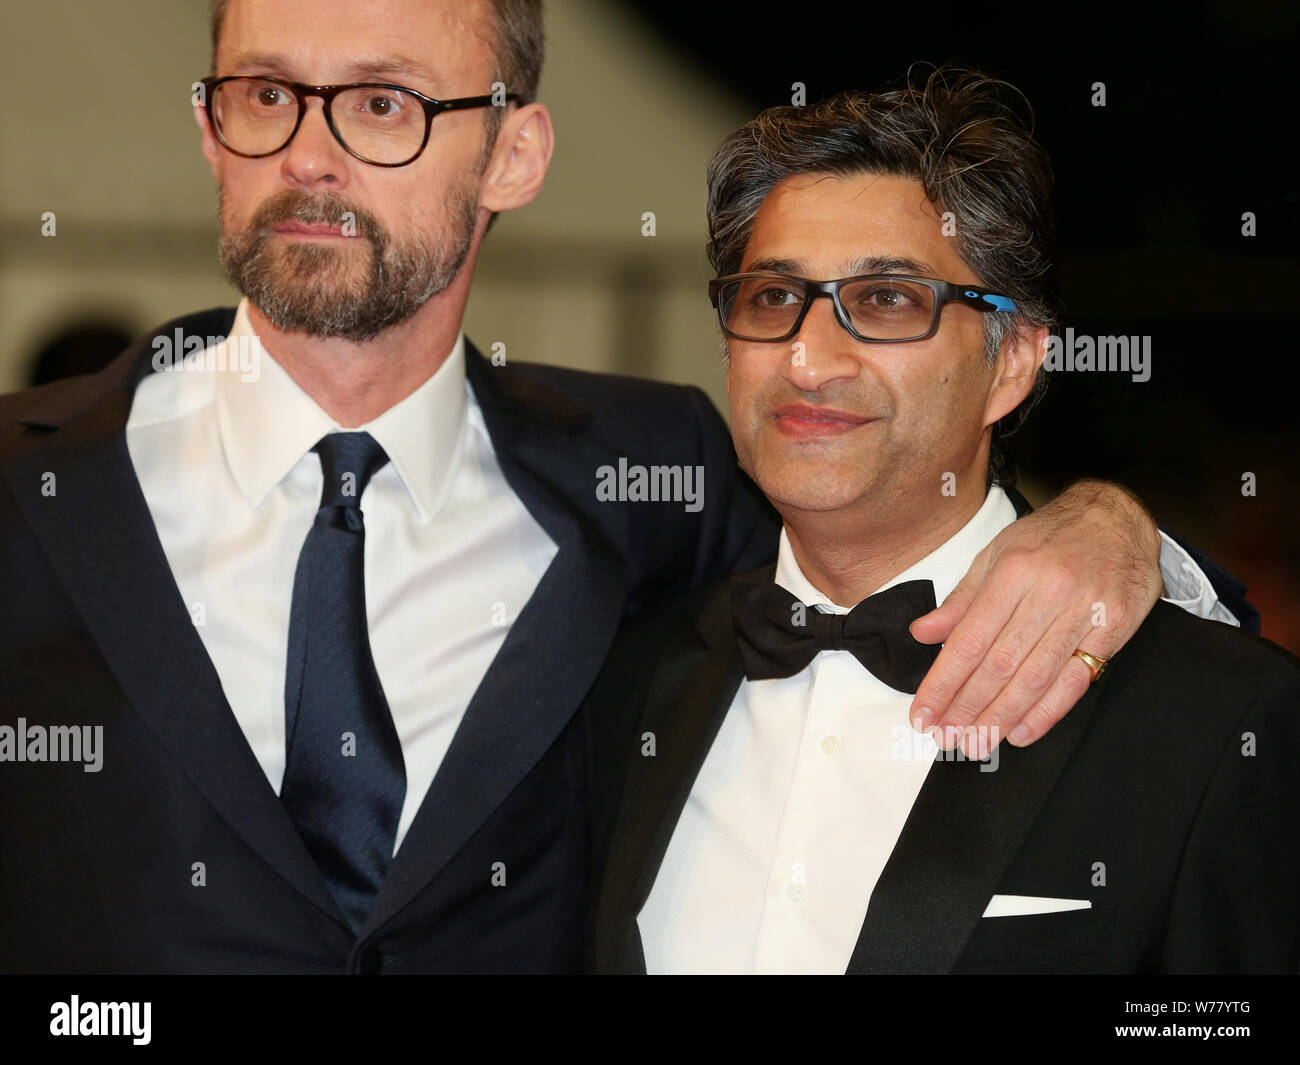 CANNES, FRANCE - MAY 19: James Gay-Rees and Asif Kapadia attend the Diego Maradona screening during the 72nd Cannes Film Festival (Mickael Chavet) Stock Photo